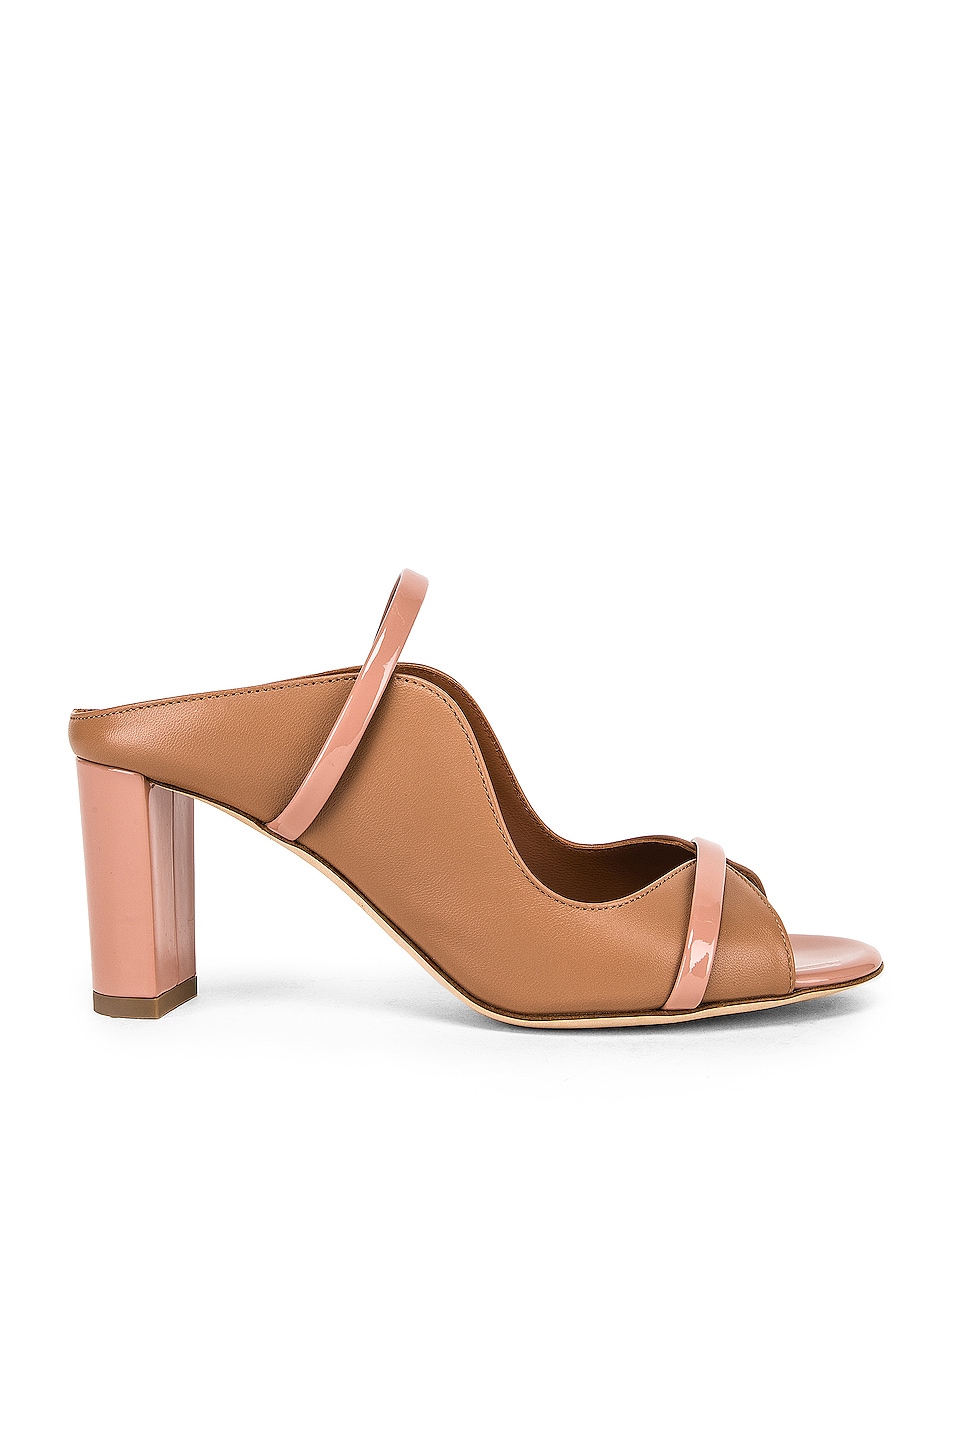 Image 1 of Malone Souliers Nora Heel in Nude & Blush